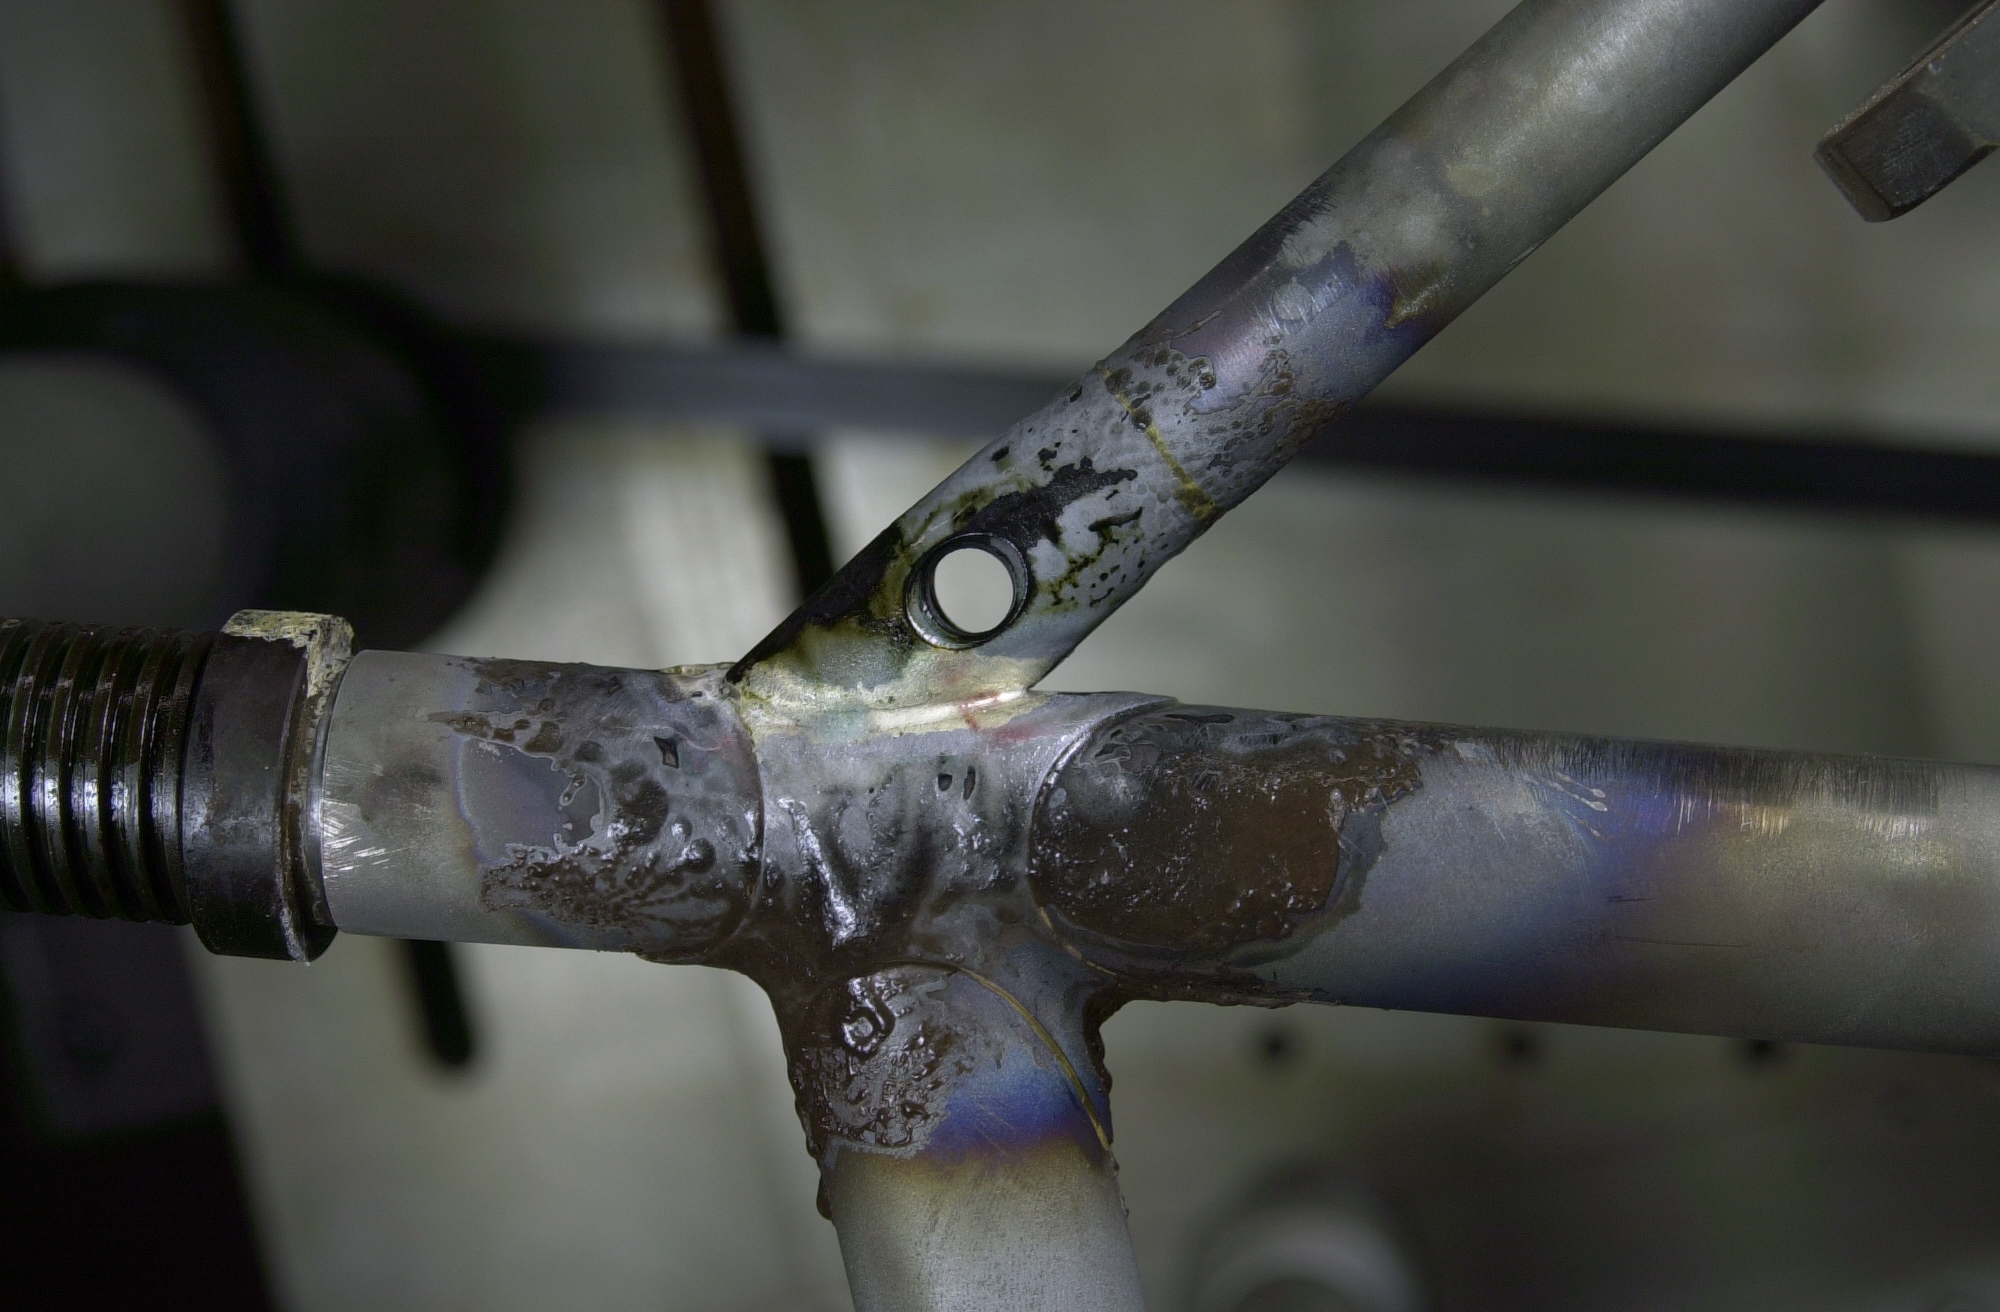 The wishbone topstay binder was previously brass brazed using a preform ring placed inside the 19mm topstay tube.  This photo shows the silver brazing of the topstay binder to the rear of the seat lug.  The binder itself is milled from a piece of 4130 round stock and mitred with a 31mm mitre cutter to match the diameter of the seat lug at the angle of the seat tube/topstay joint.